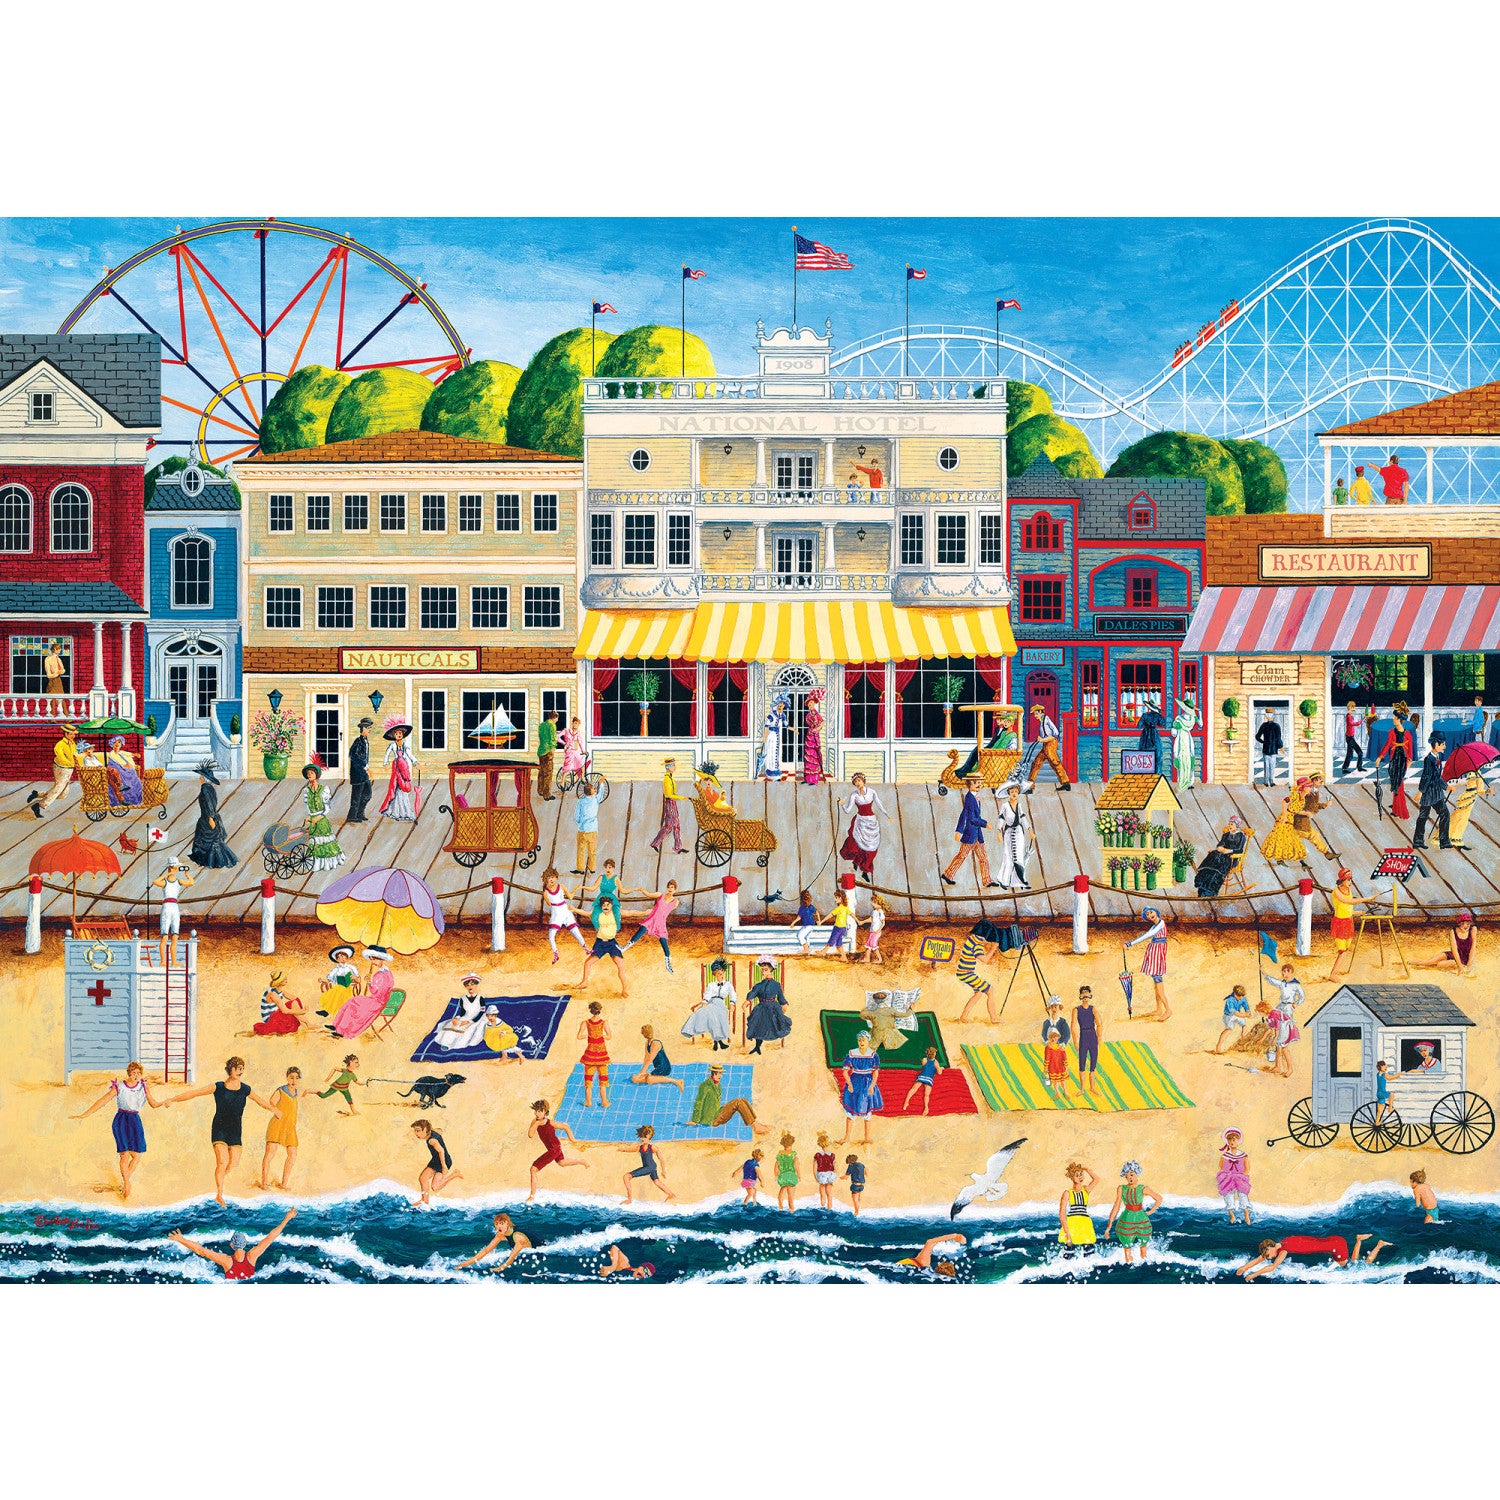 Signature - On the Boardwalk 3000 Piece Puzzle By Art Poulin – Flawed